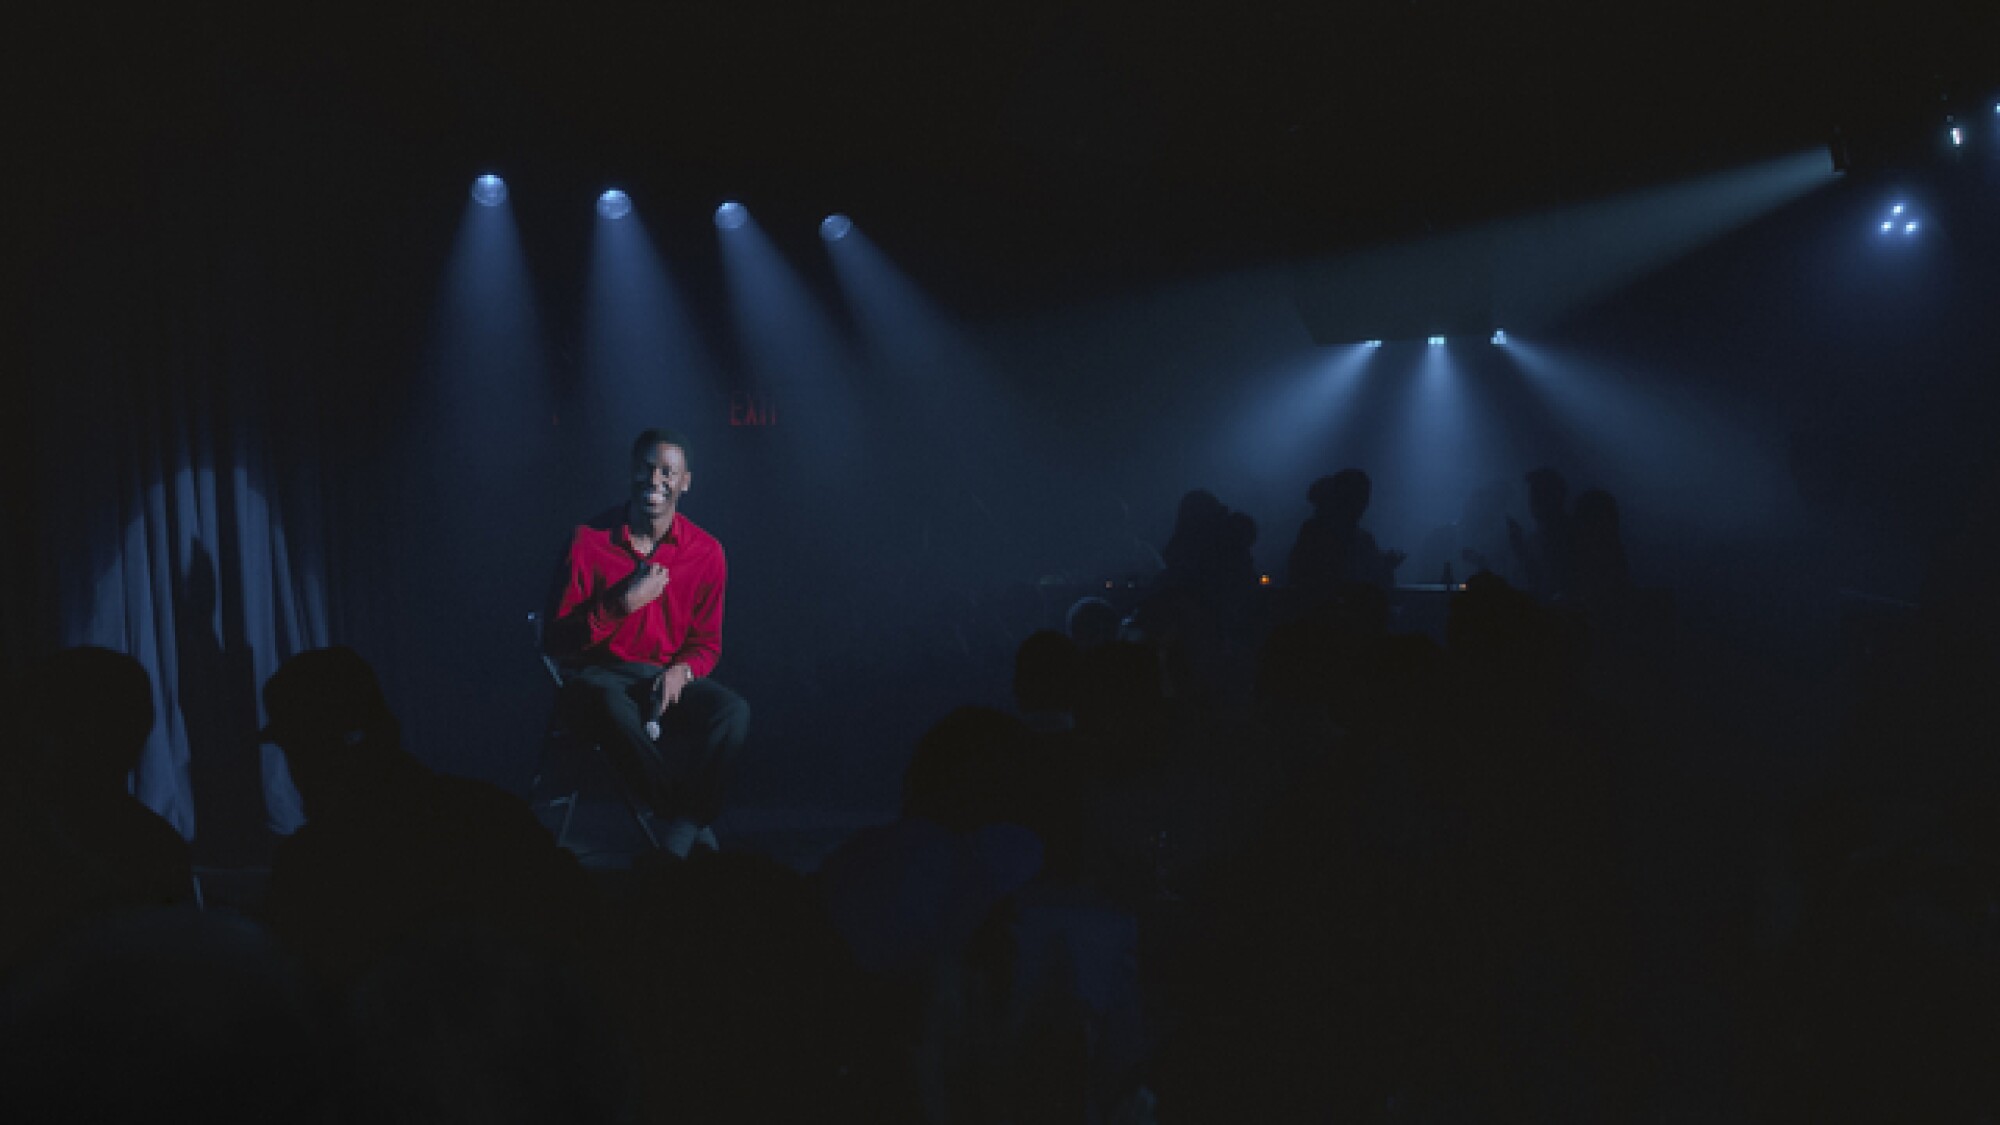 A man in a red shirt sits on a spot-lit stage